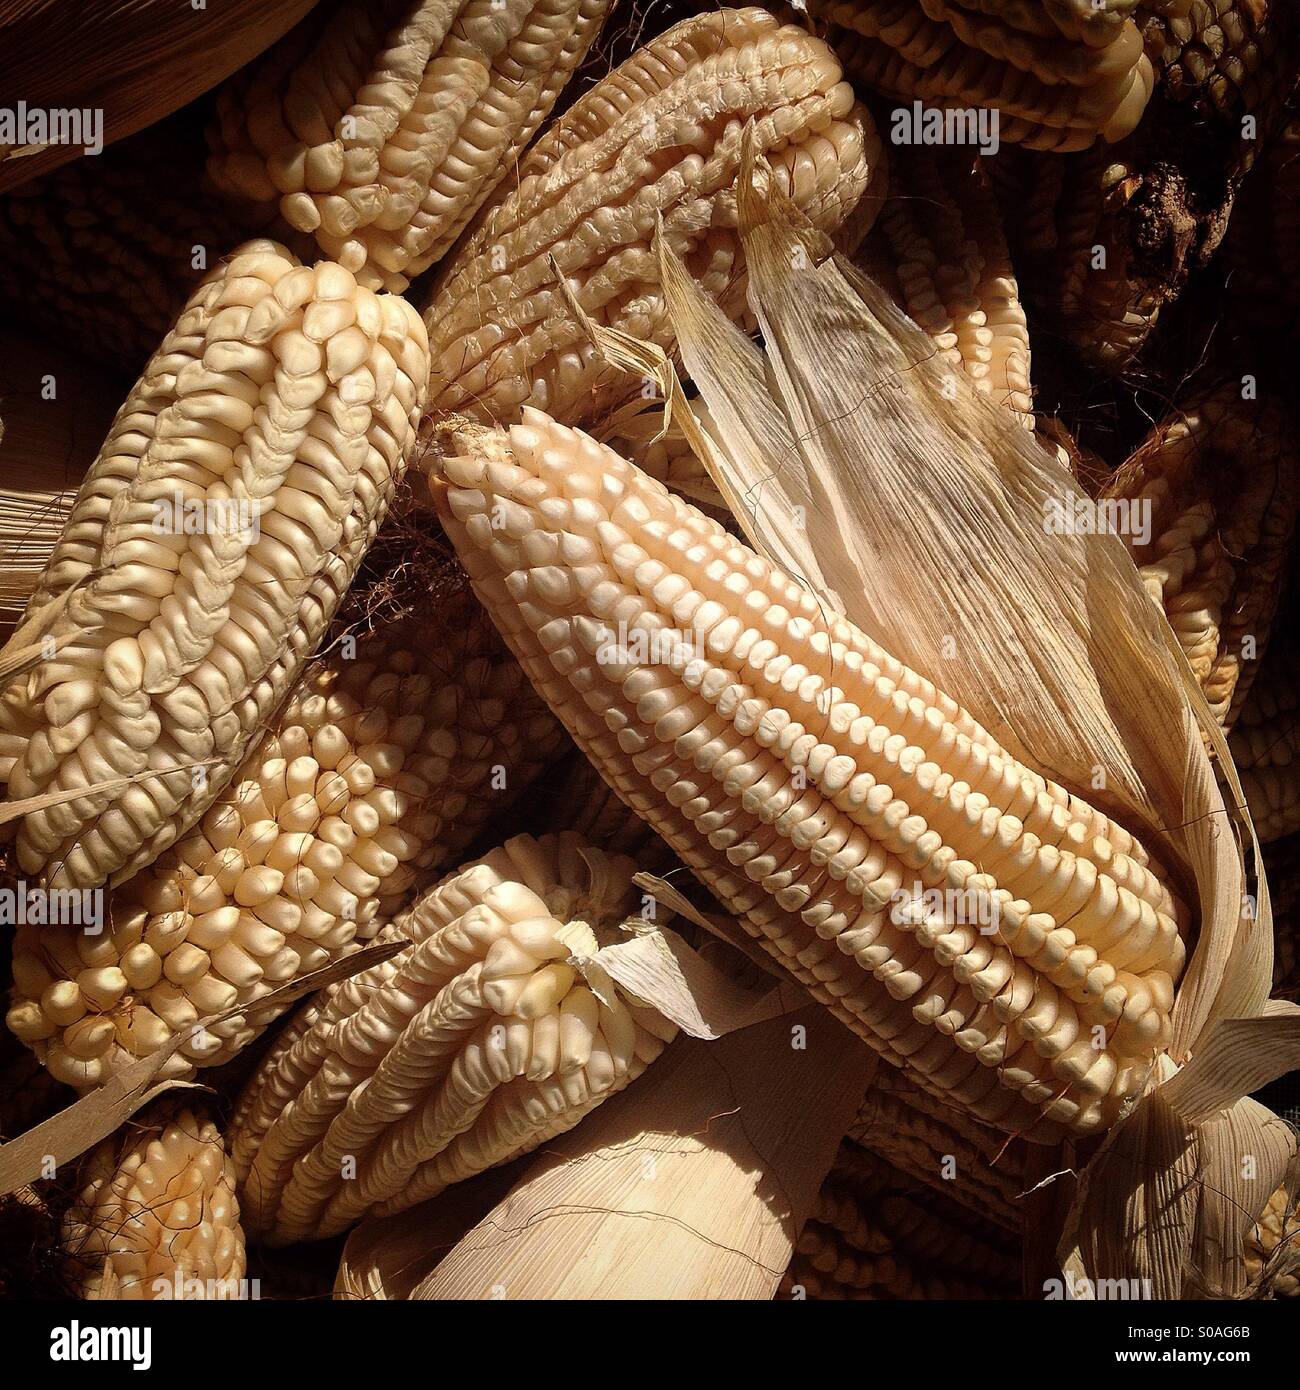 Ancient Mexican corn cibs in the seeds bank of farmer Tomás Villanueva in Tepetlixpa, Mexico State, Mexico. GMO seeds are threatening to contaminate native varieties of corn in México. Stock Photo